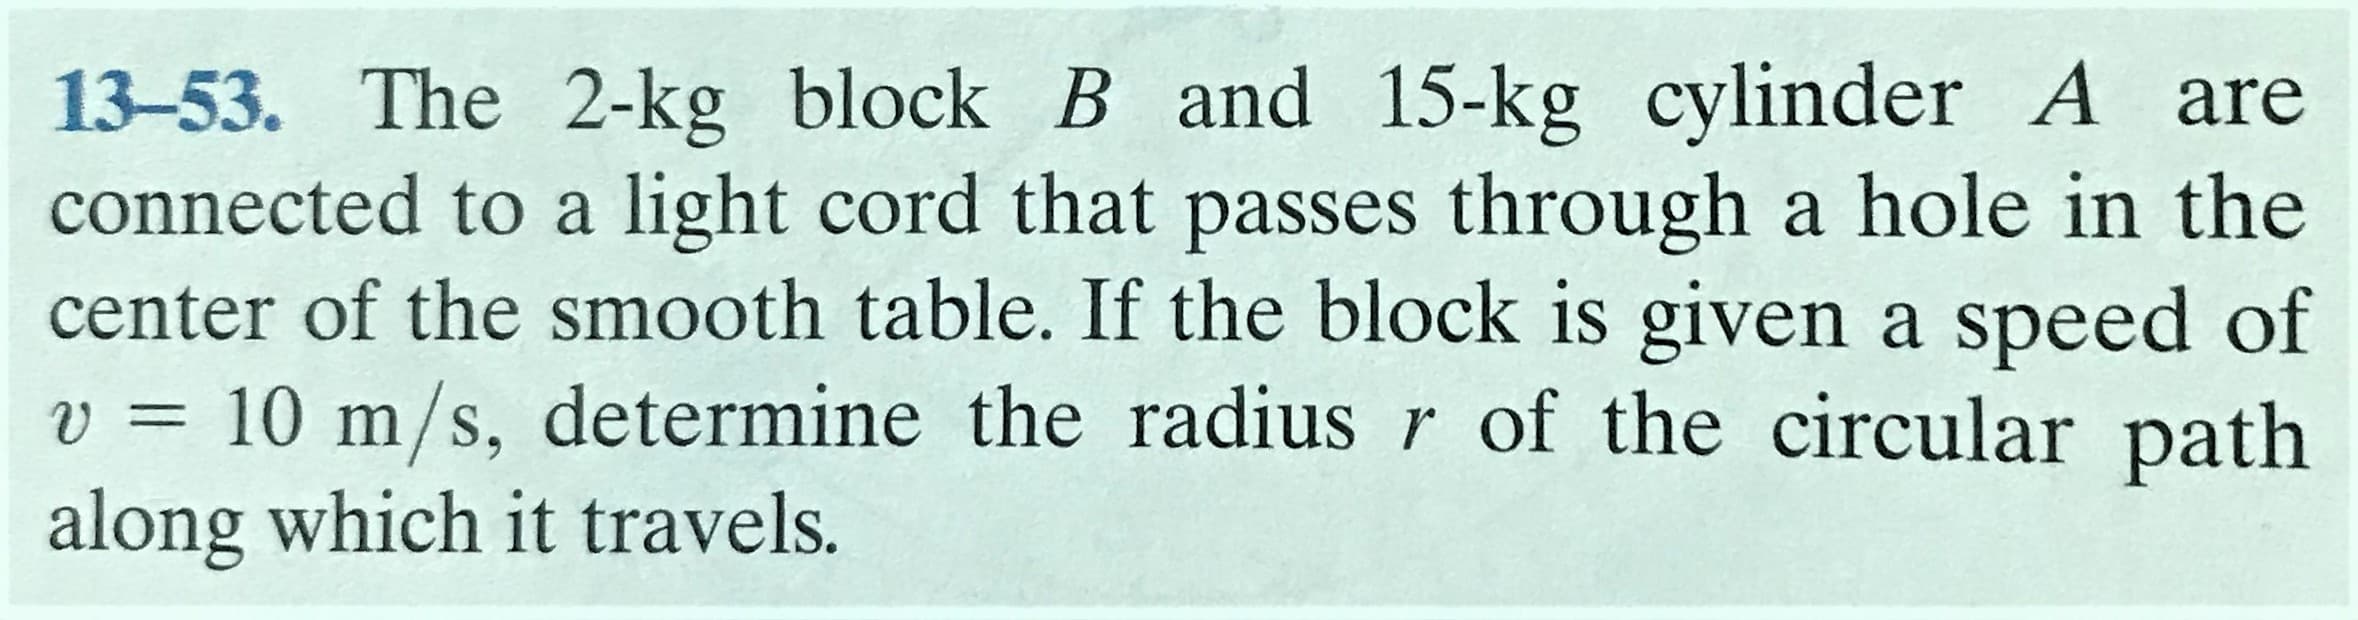 13-53. The 2-kg block B and 15-kg cylinder A are
connected to a light cord that passes through a hole in the
center of the smooth table. If the block is given a speed of
v = 10 m/s, determine the radius r of the circular path
along which it travels.
